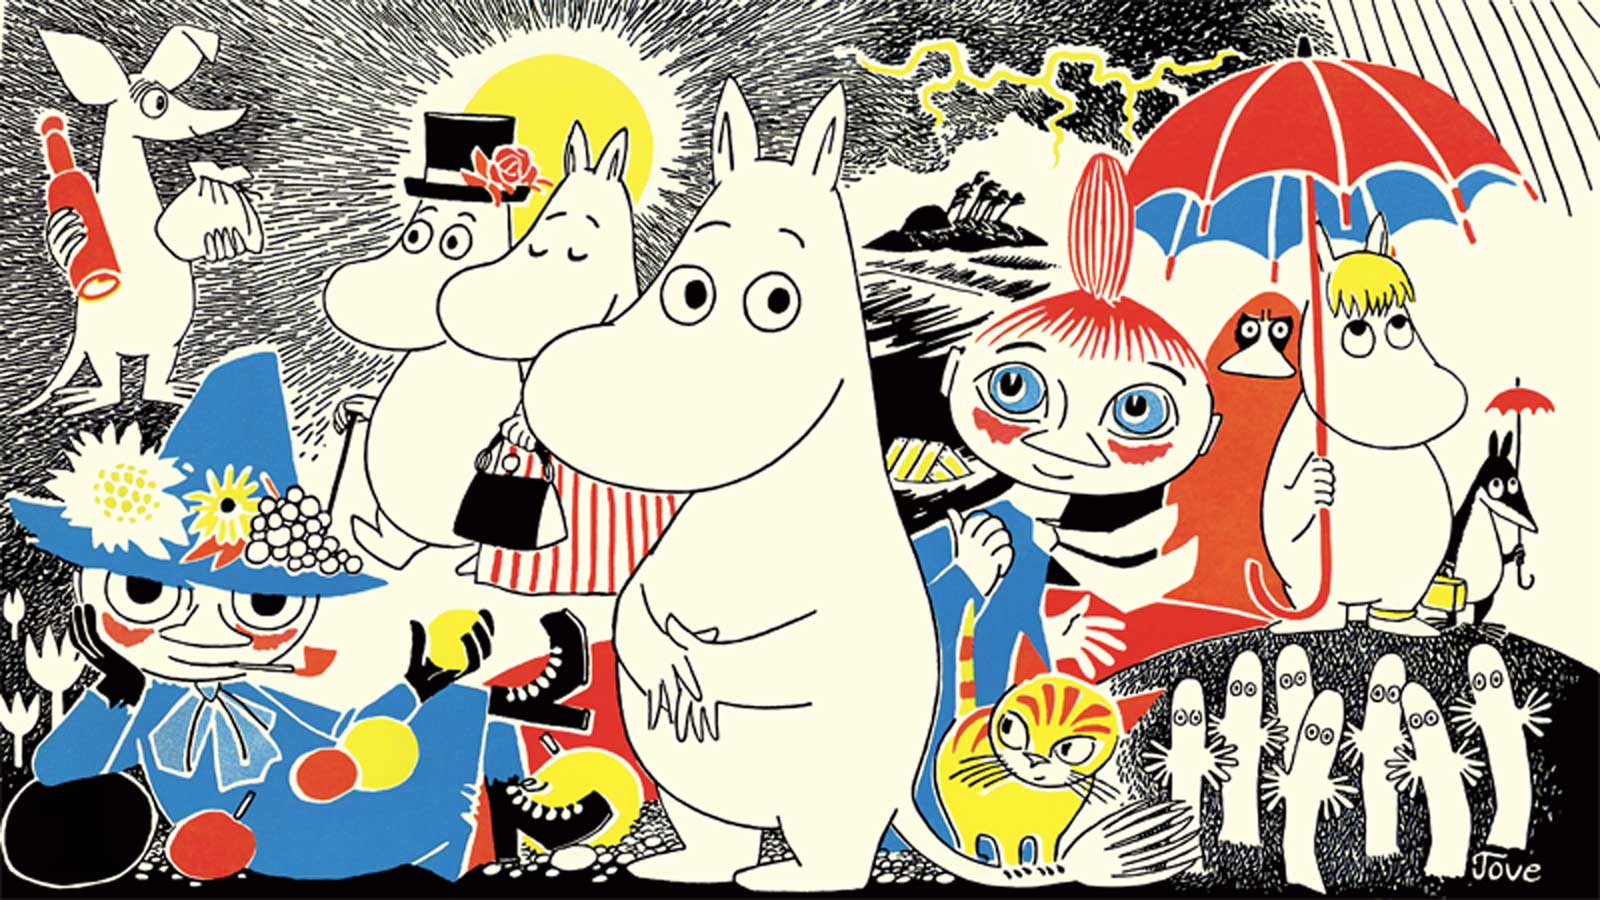 Illustrated image of all of the Moomin characters